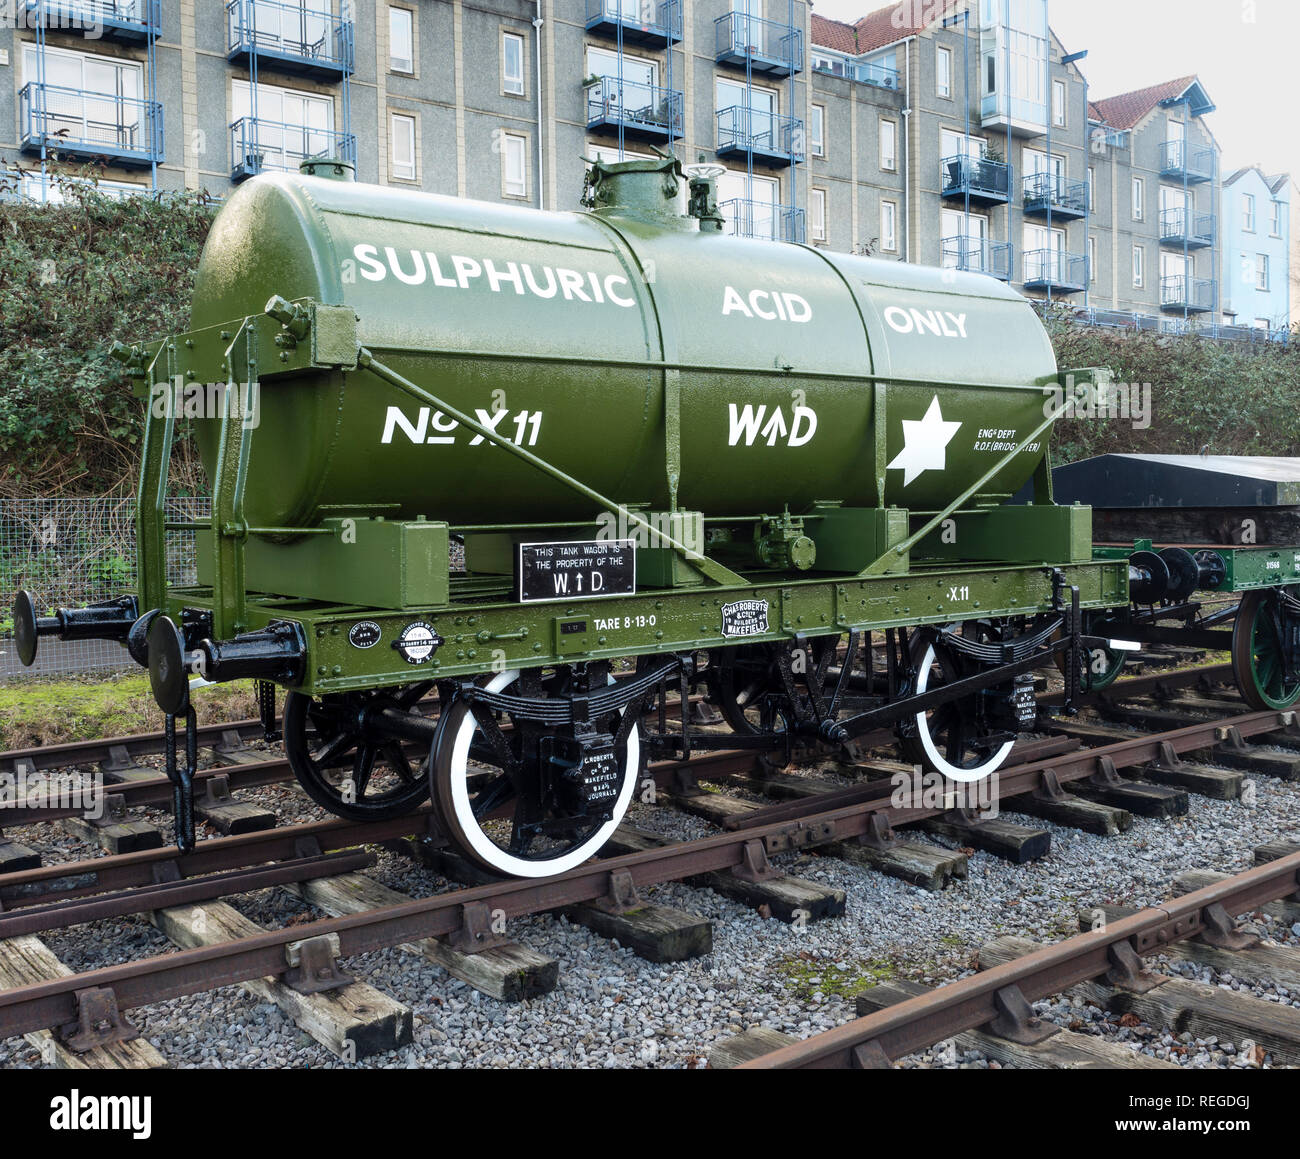 War Department Acid Tank on railway sidings in front of modern flats at Bristol's Harbourside in the UK Stock Photo